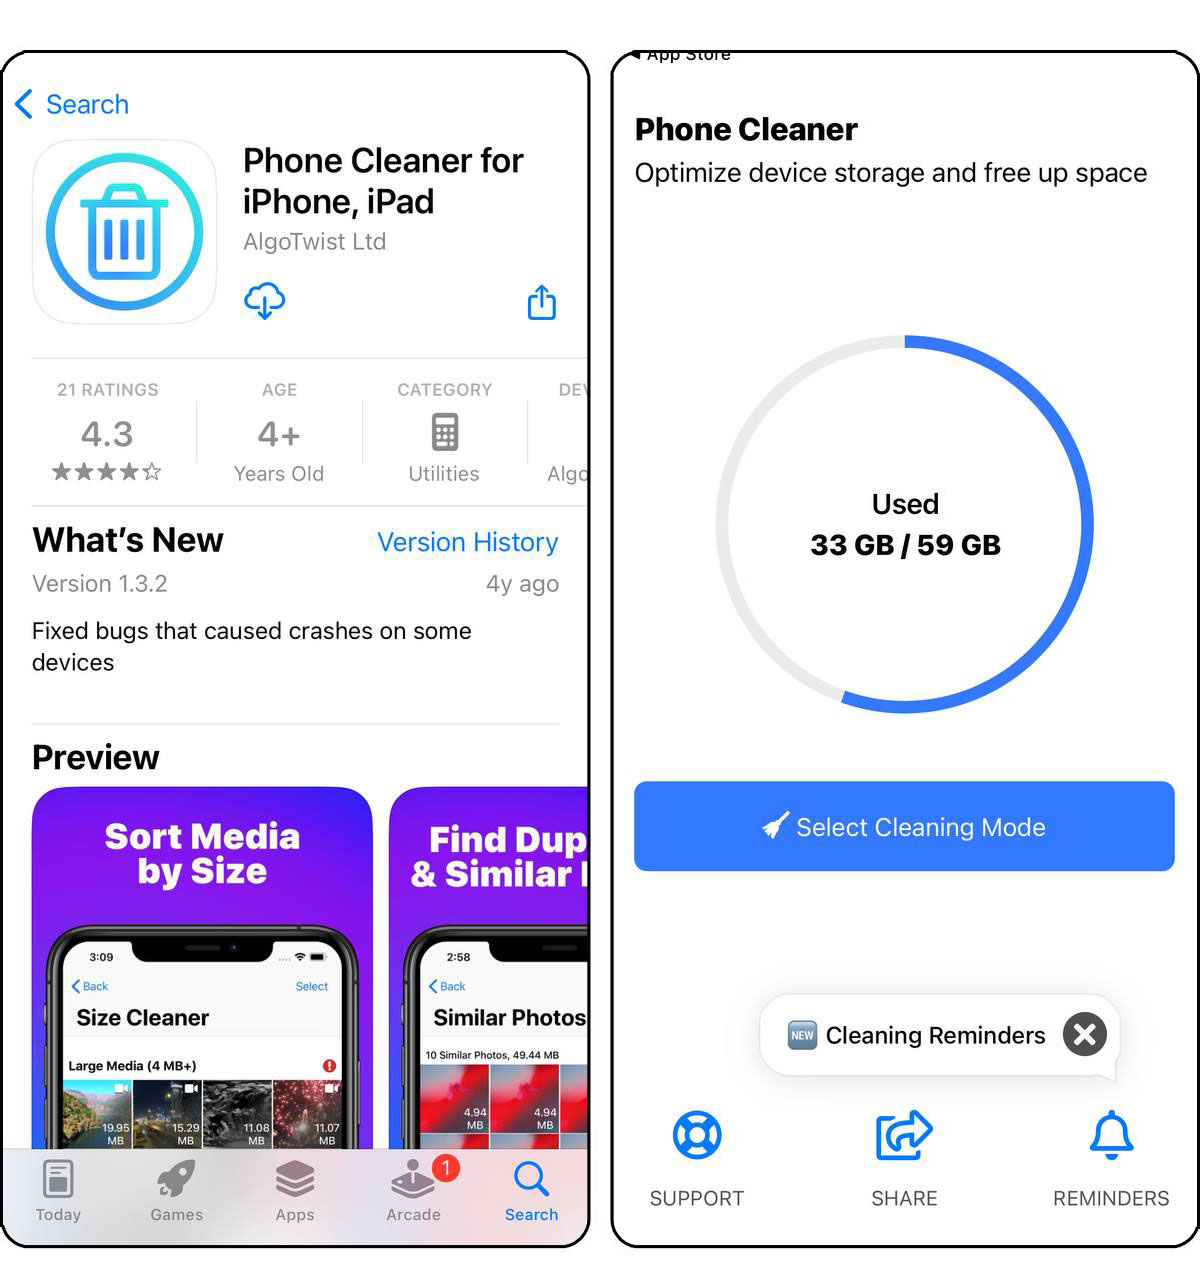 Phone Cleaner for iPhone, iPad